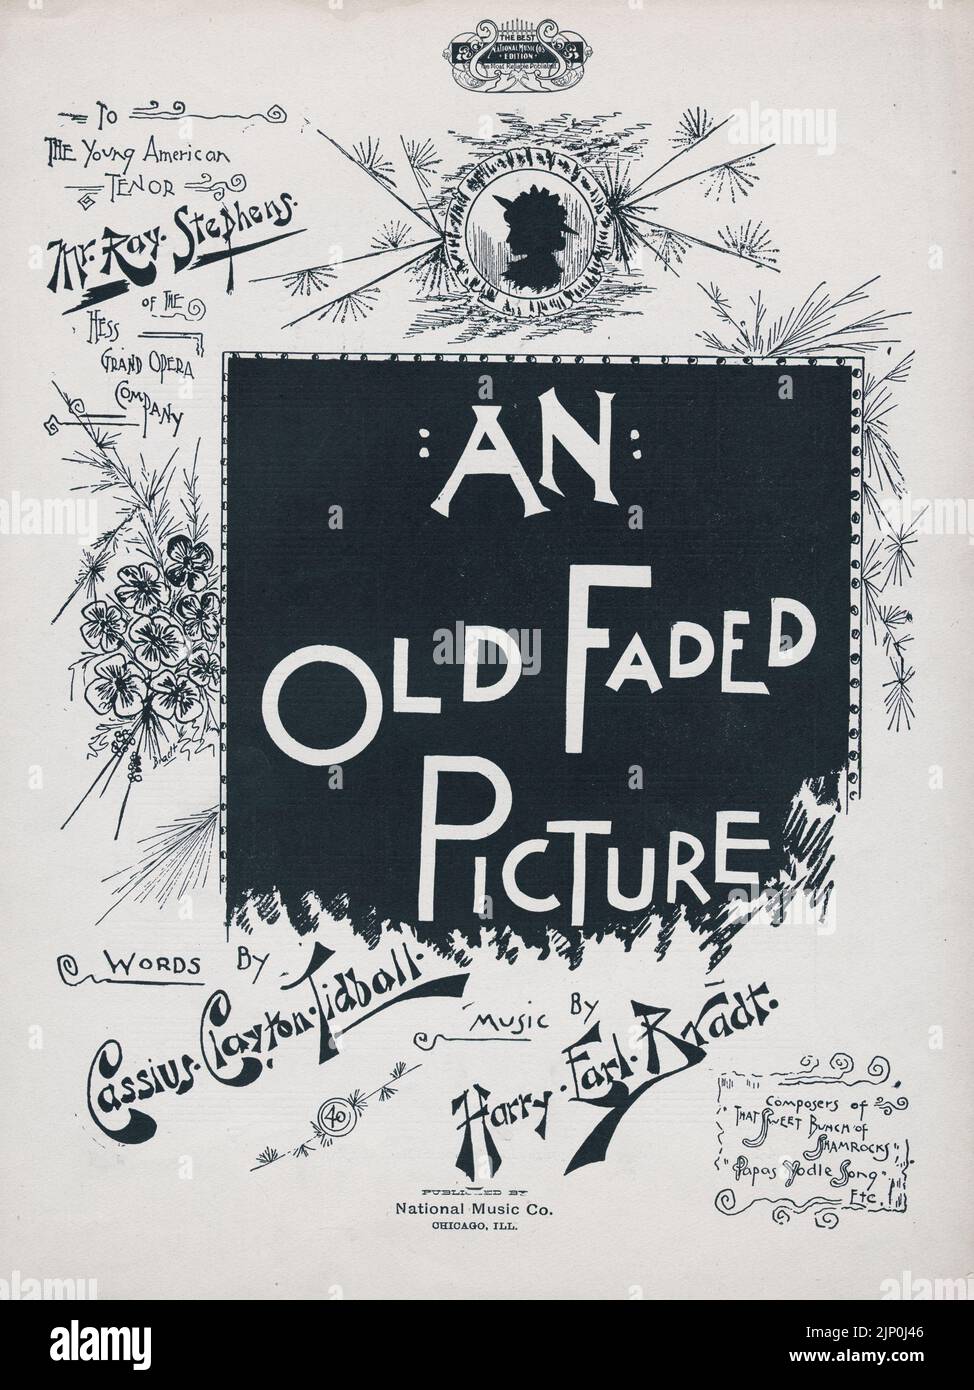 An Old Faded Picture, Words by Cassius Clayton Tidball, Music by Harry Earl Bradt, publié par National Music Co (1890) Sheet Music Cover Banque D'Images